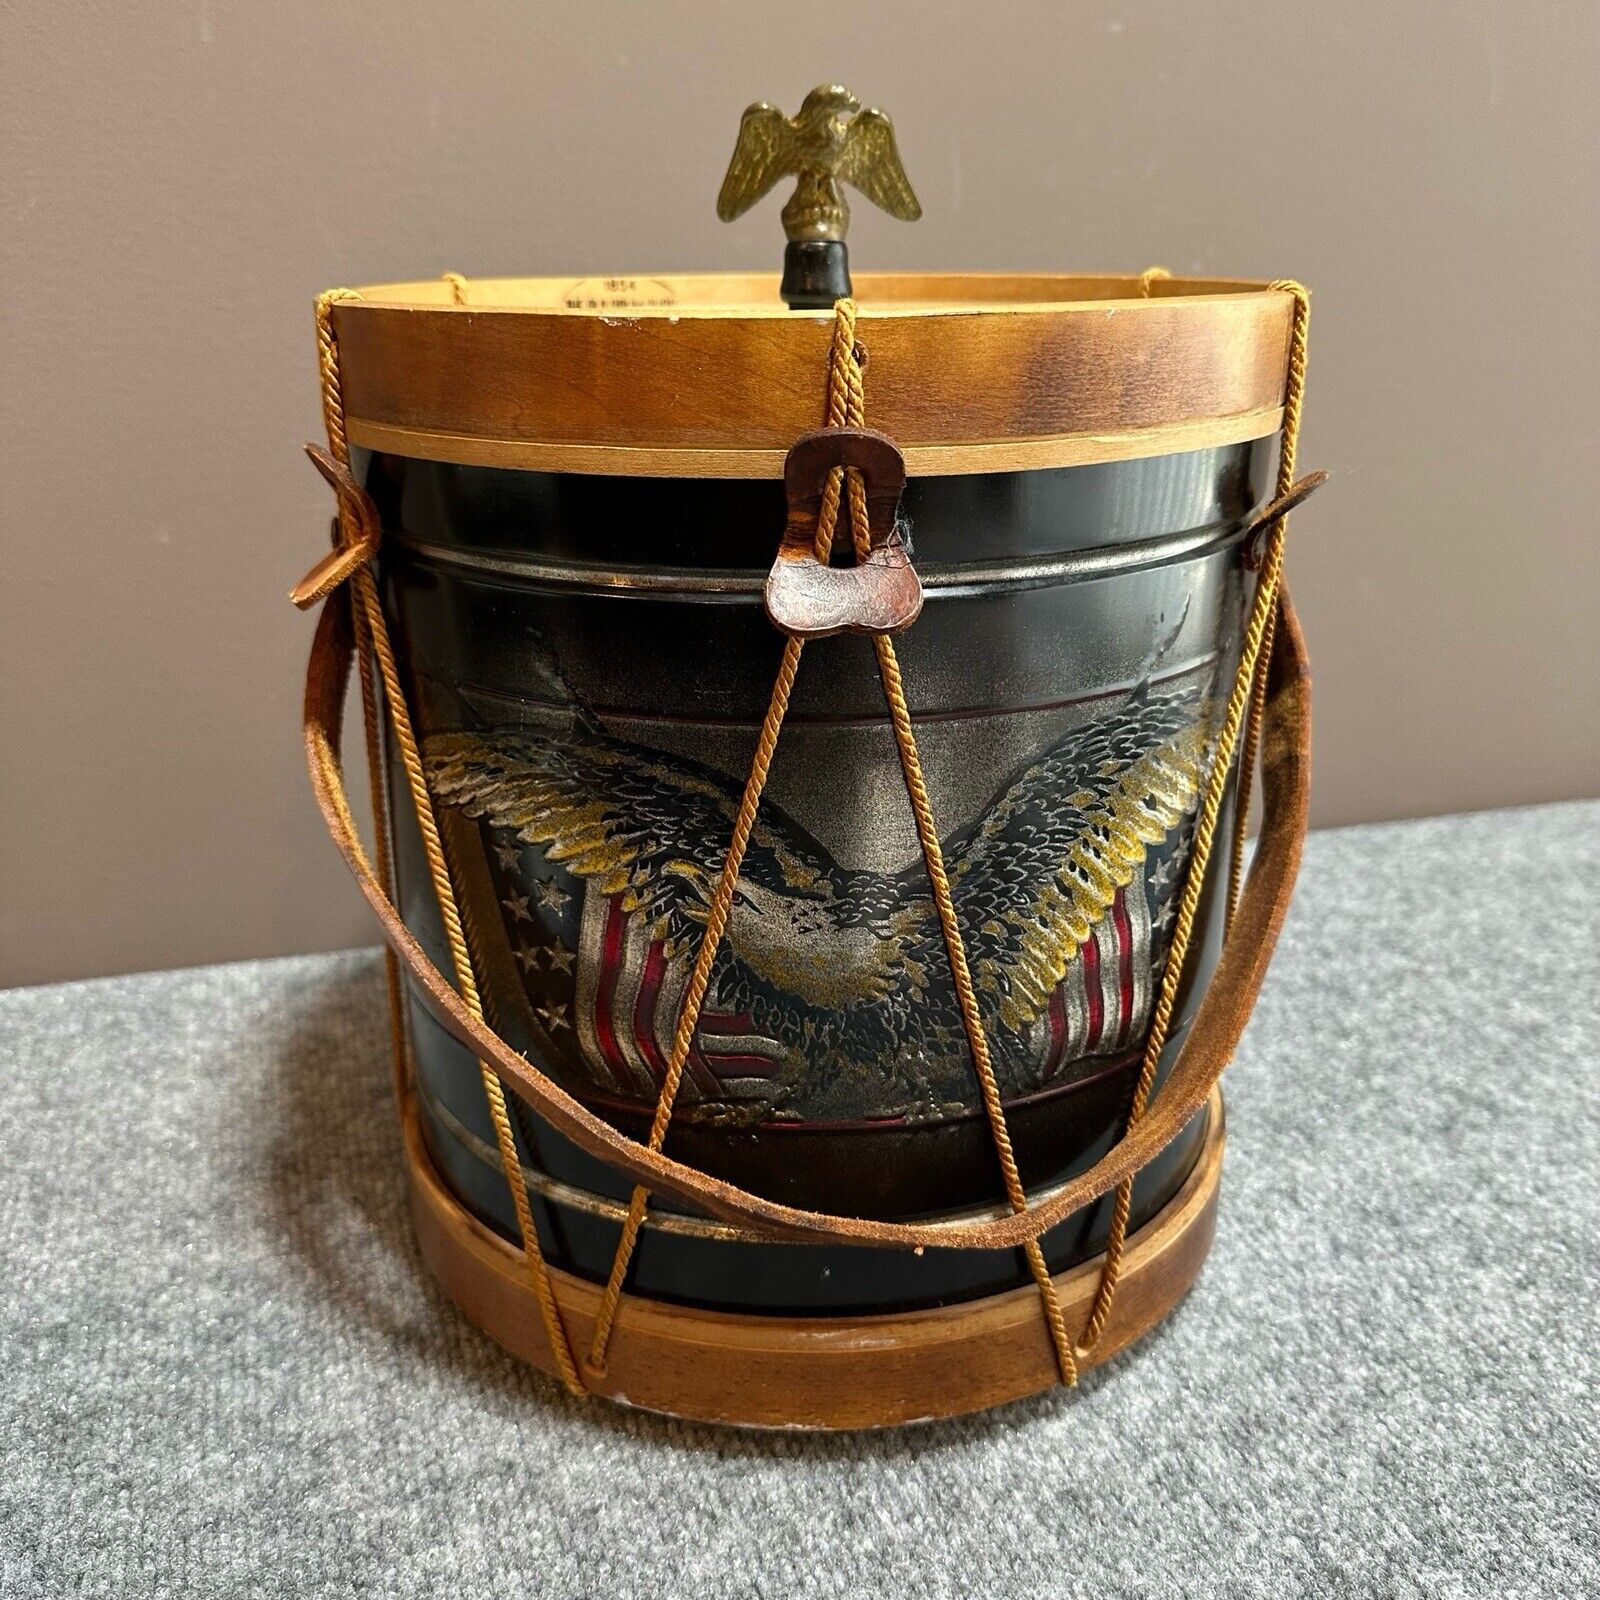 Vintage The Old Drum Shop Ice Bucket 1854 American Eagle Drum Replica USA Made